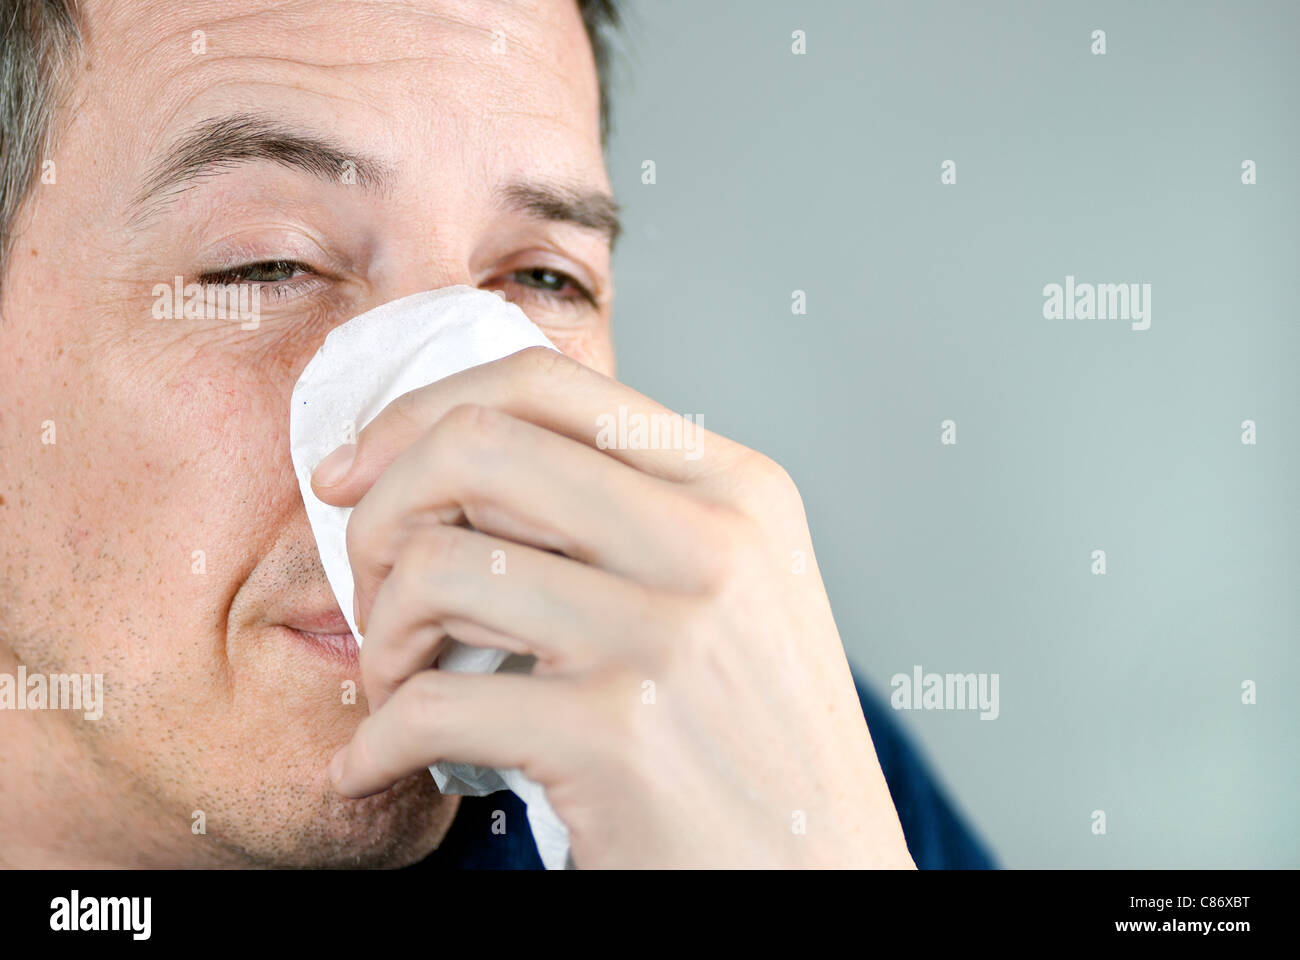 Close-up of a man holding a tissue on his nose. Stock Photo